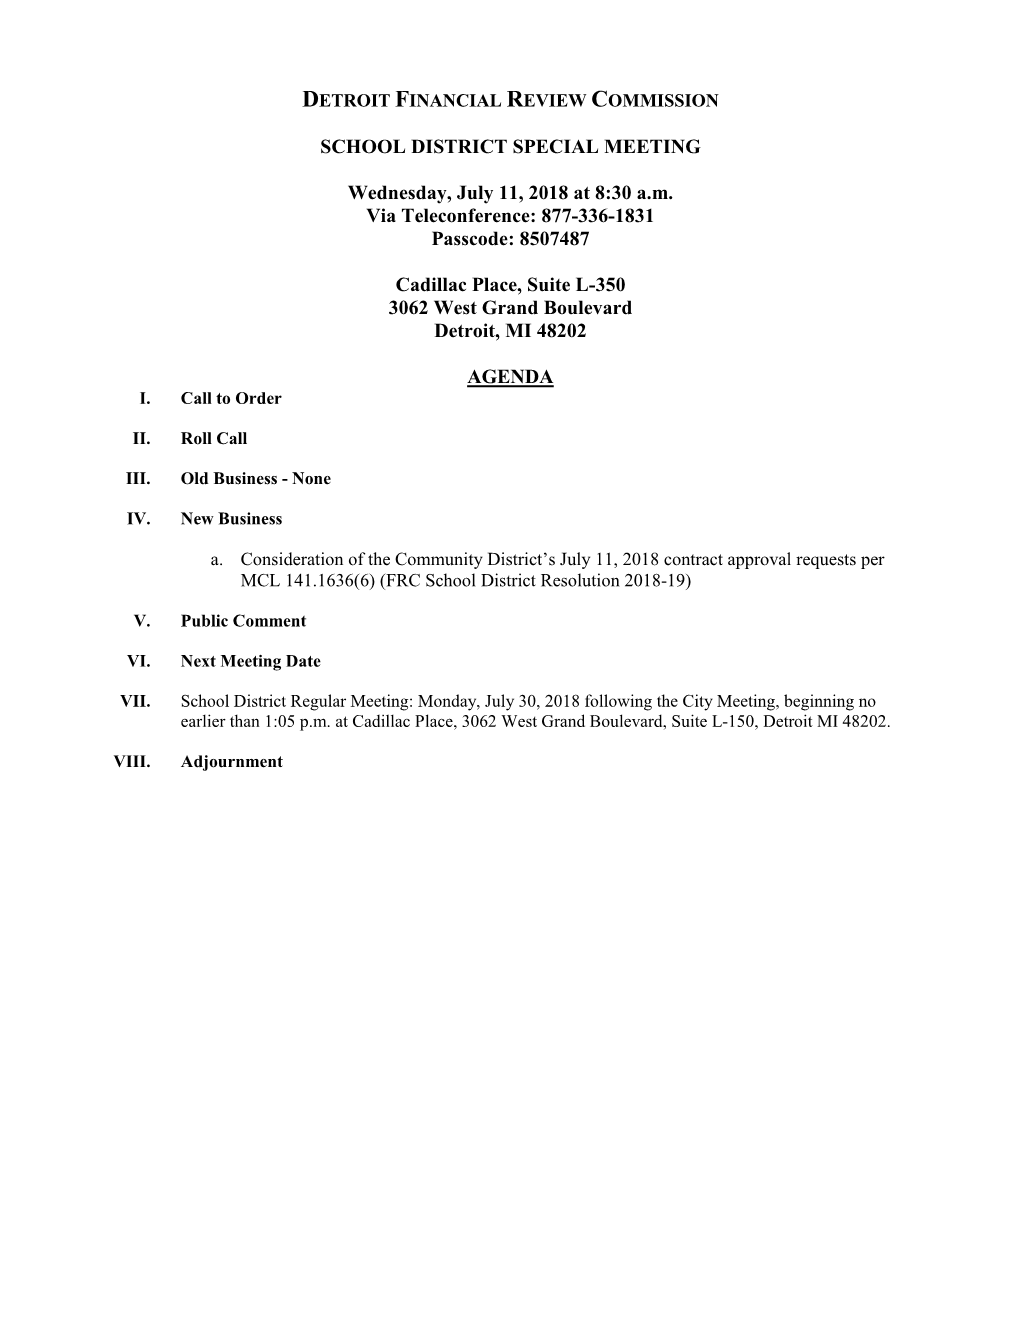 7-11-18 Detroit FRC School District Special Meeting Packet